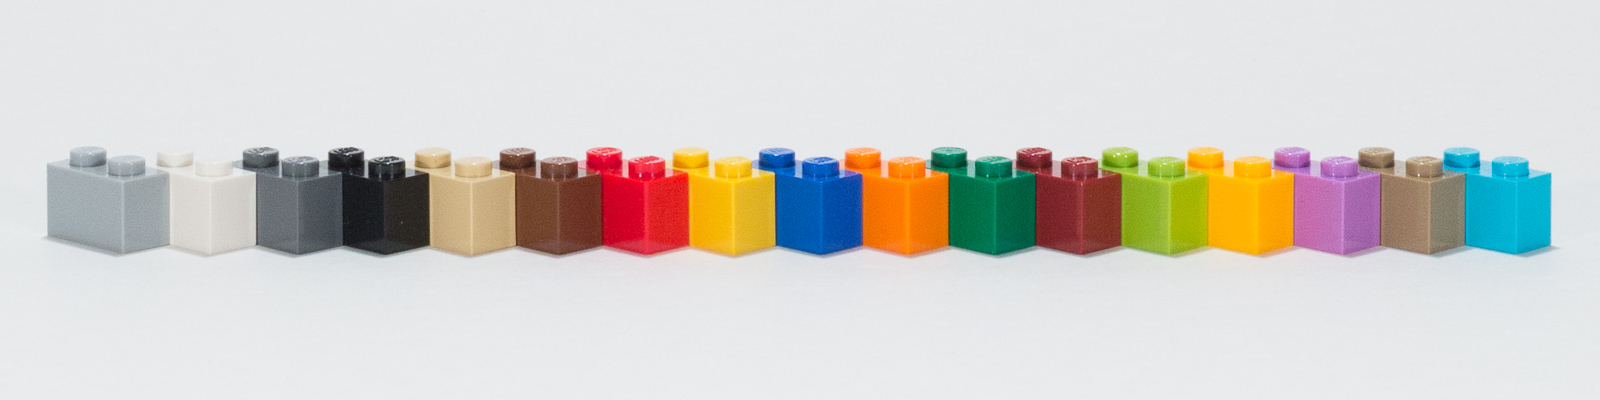 telex bad Hændelse, begivenhed Hard-to-Find LEGO Colors (and what to do about it) - BRICK ARCHITECT